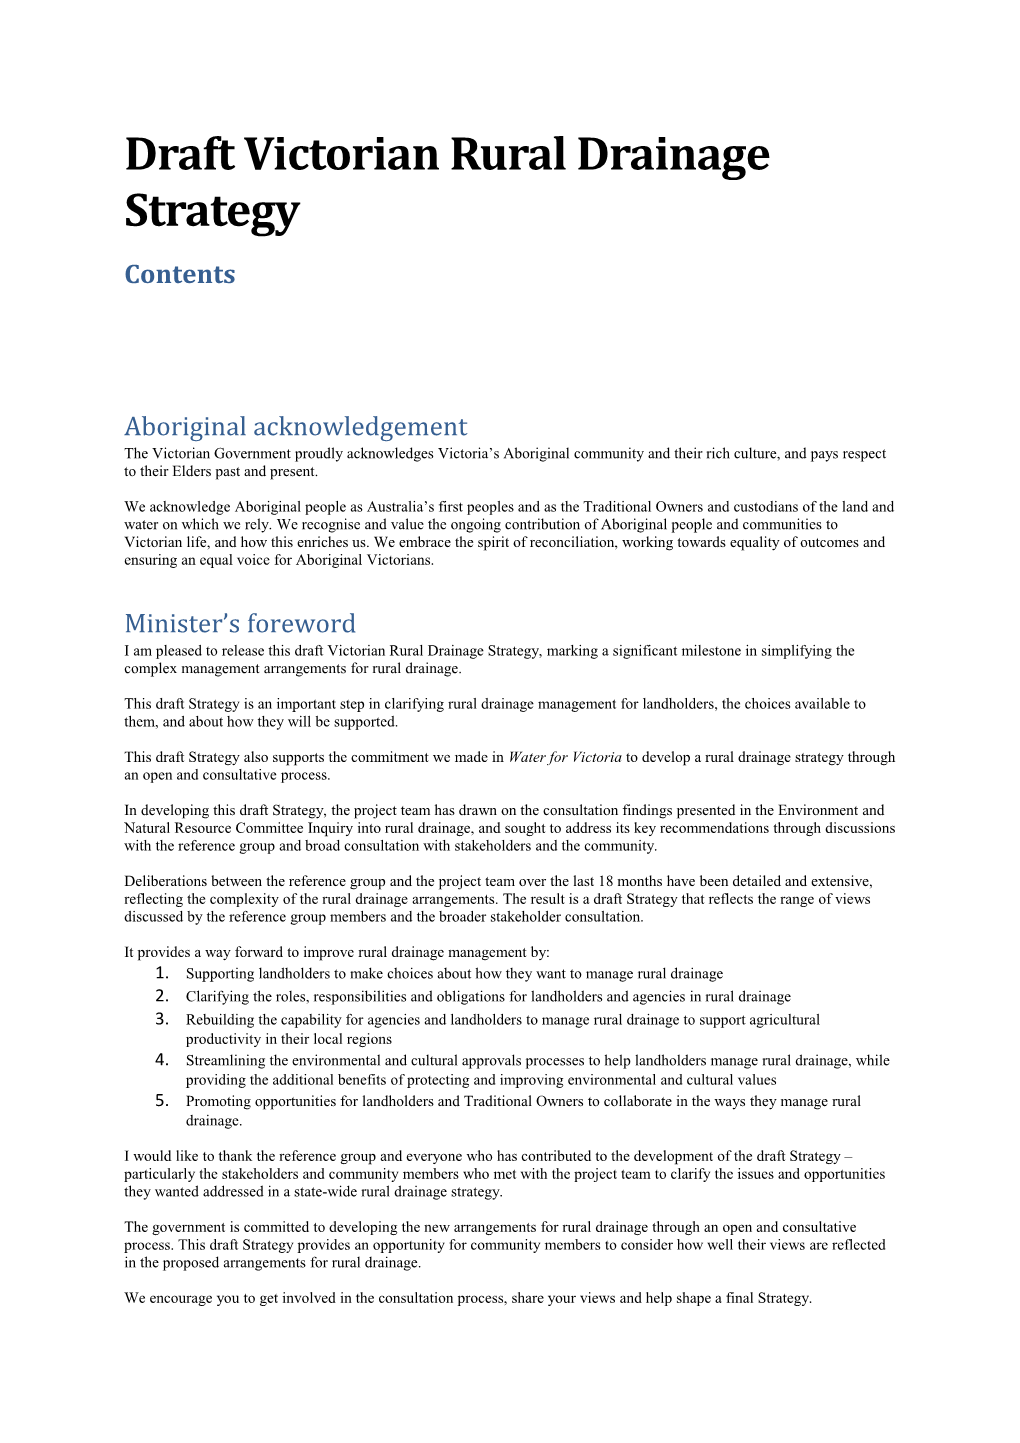 Draft Victorian Rural Drainage Strategy